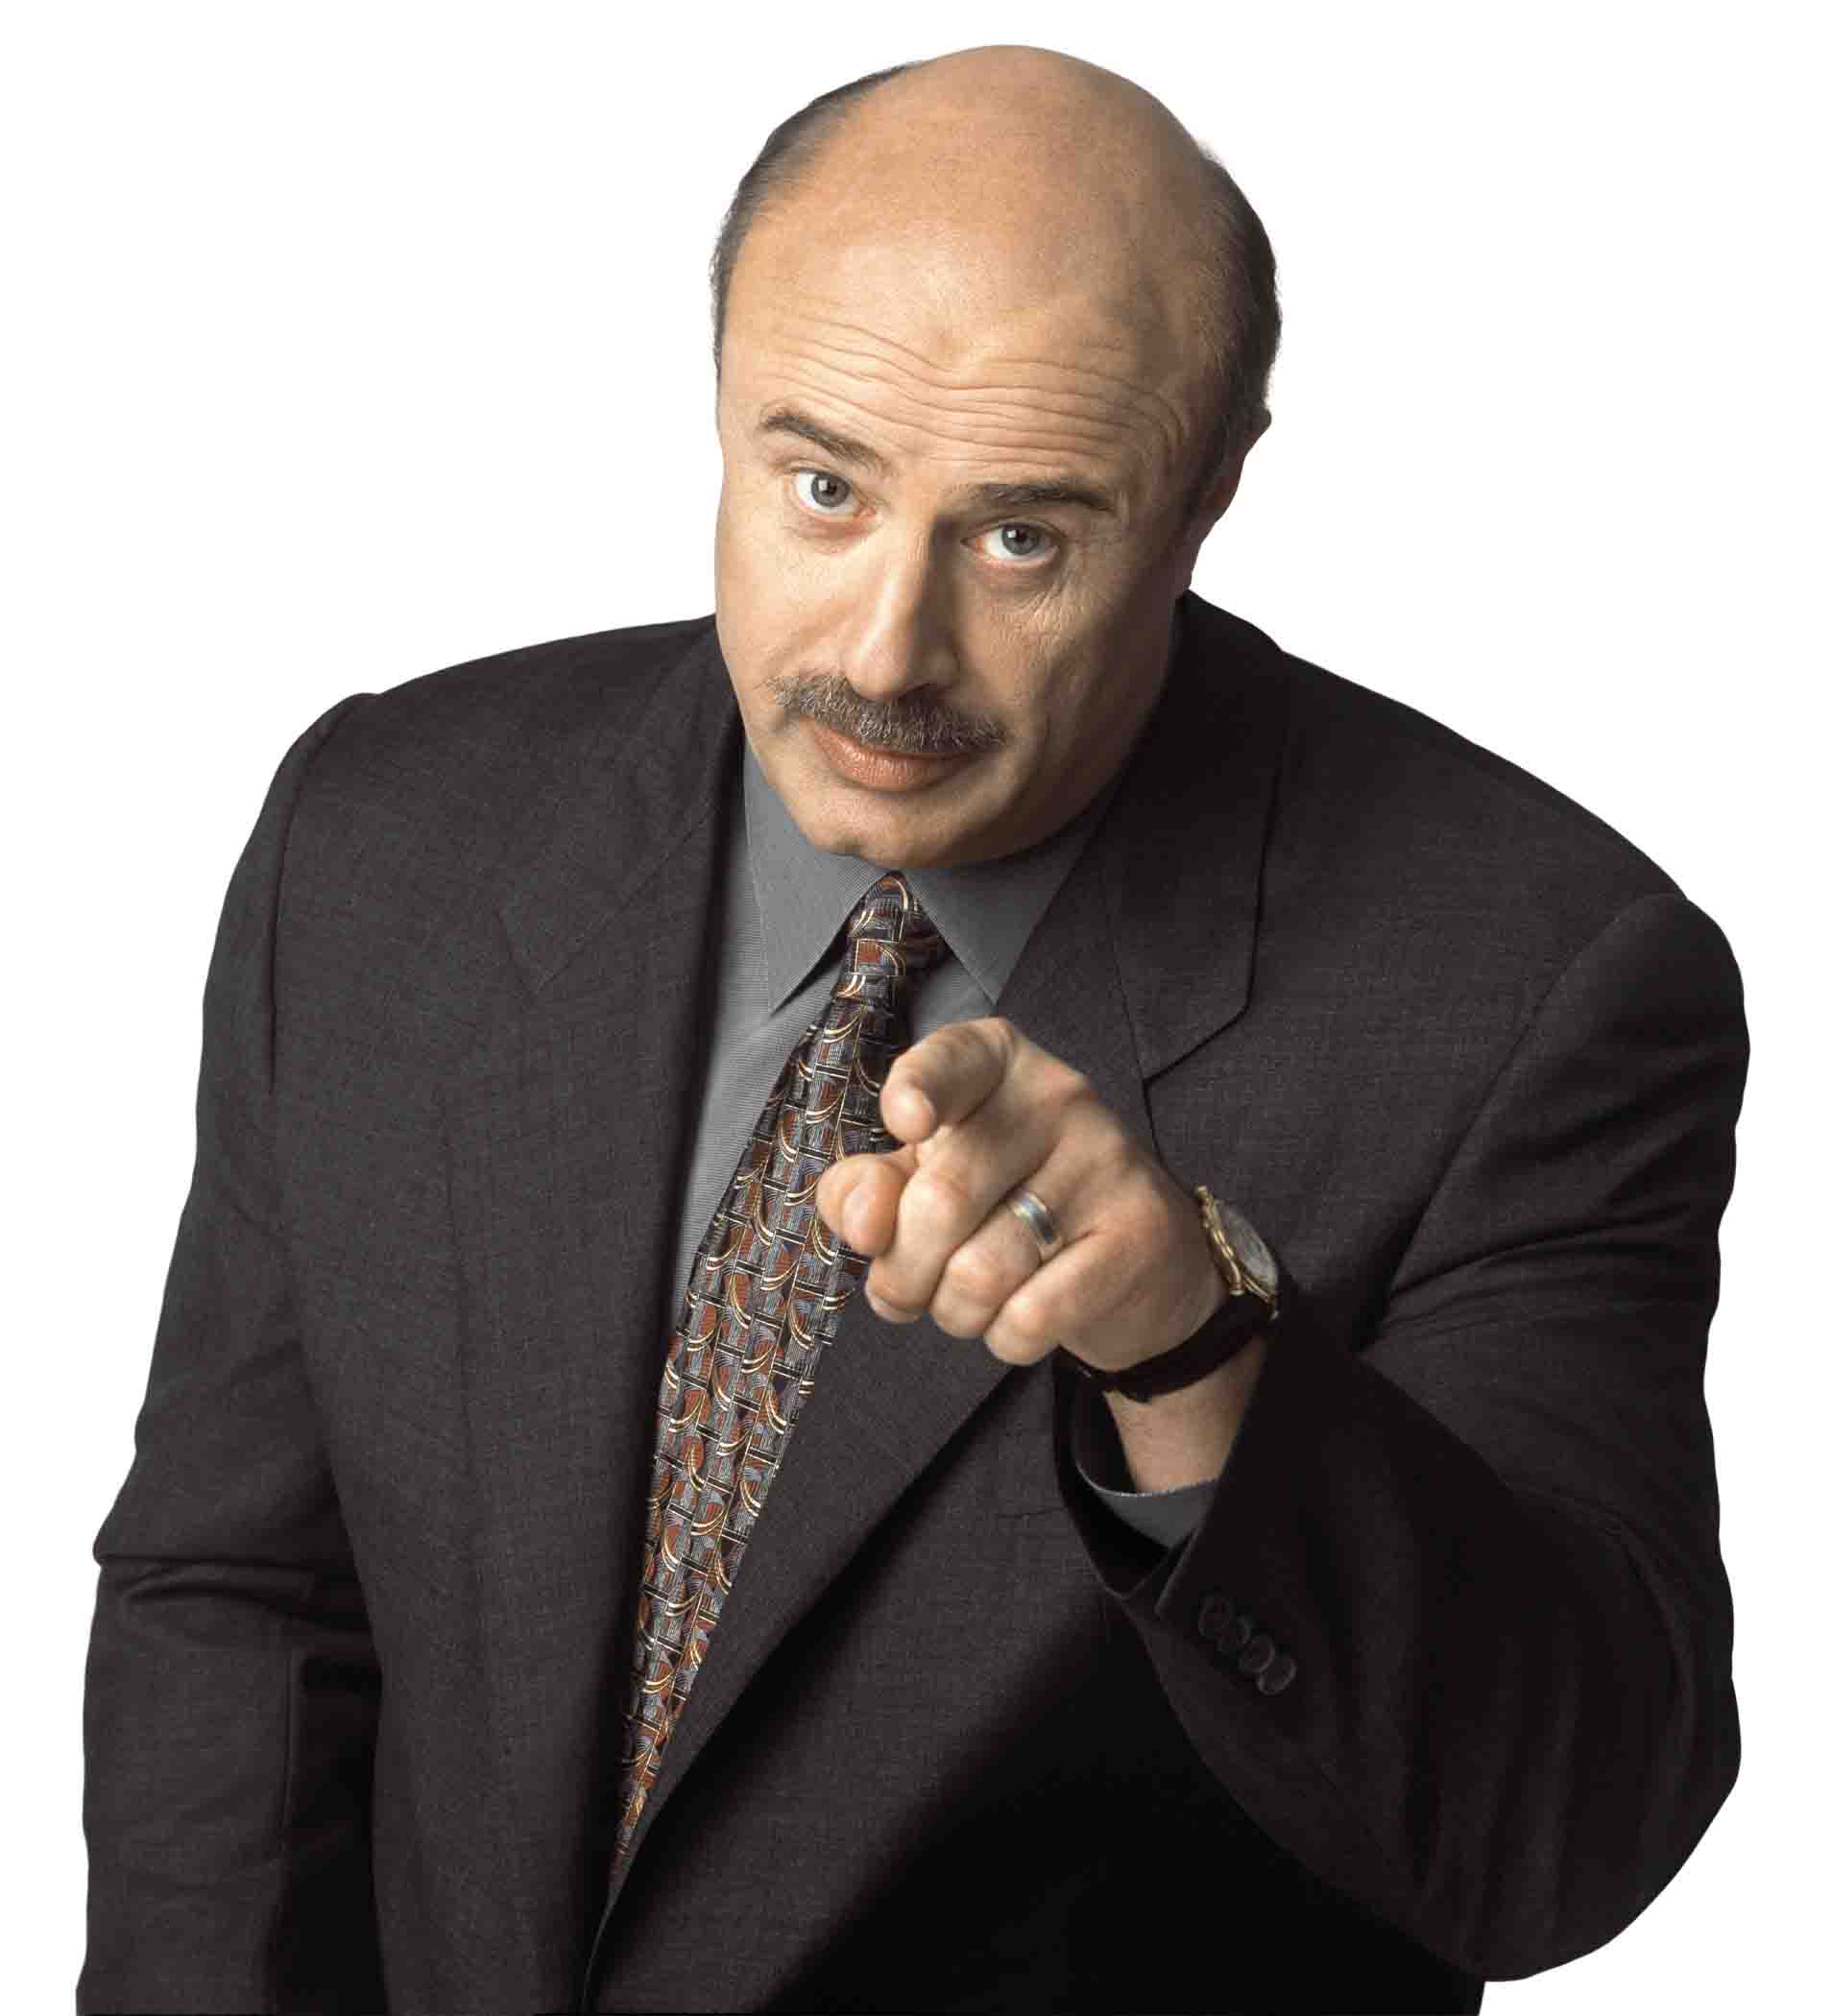 Dr. Phil visits Russia. Russia Without BS